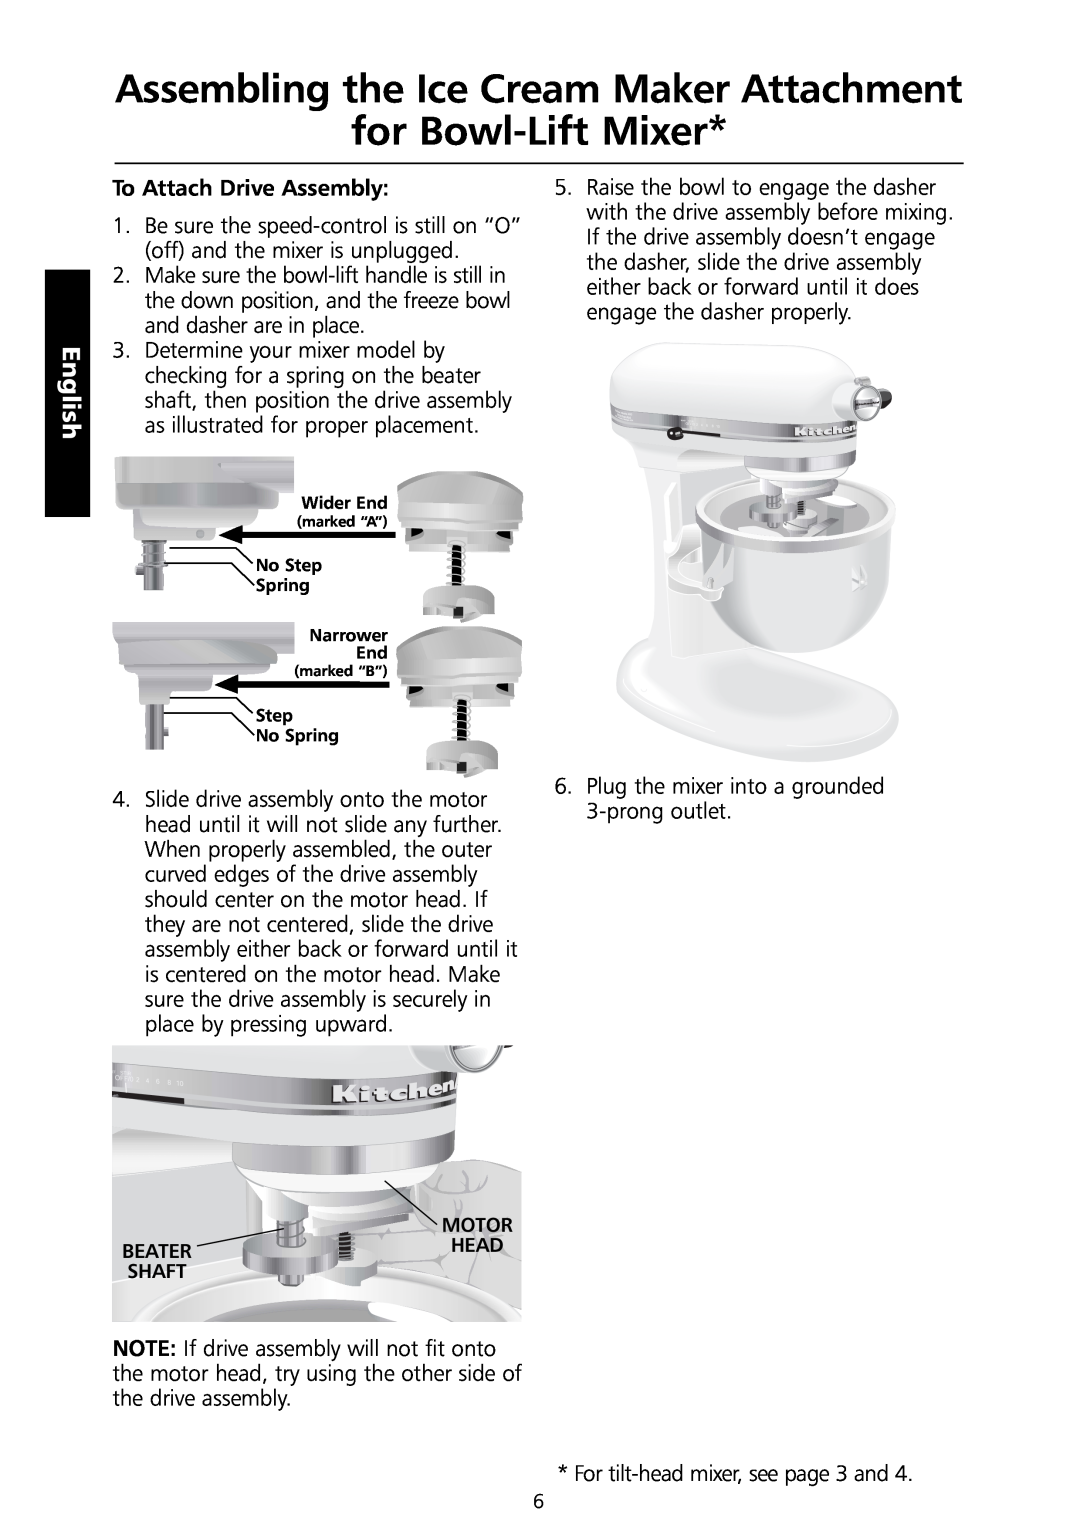 KitchenAid 5KICA0WH manual Assembling the Ice Cream Maker Attachment for Bowl-Lift Mixer, English, To Attach Drive Assembly 